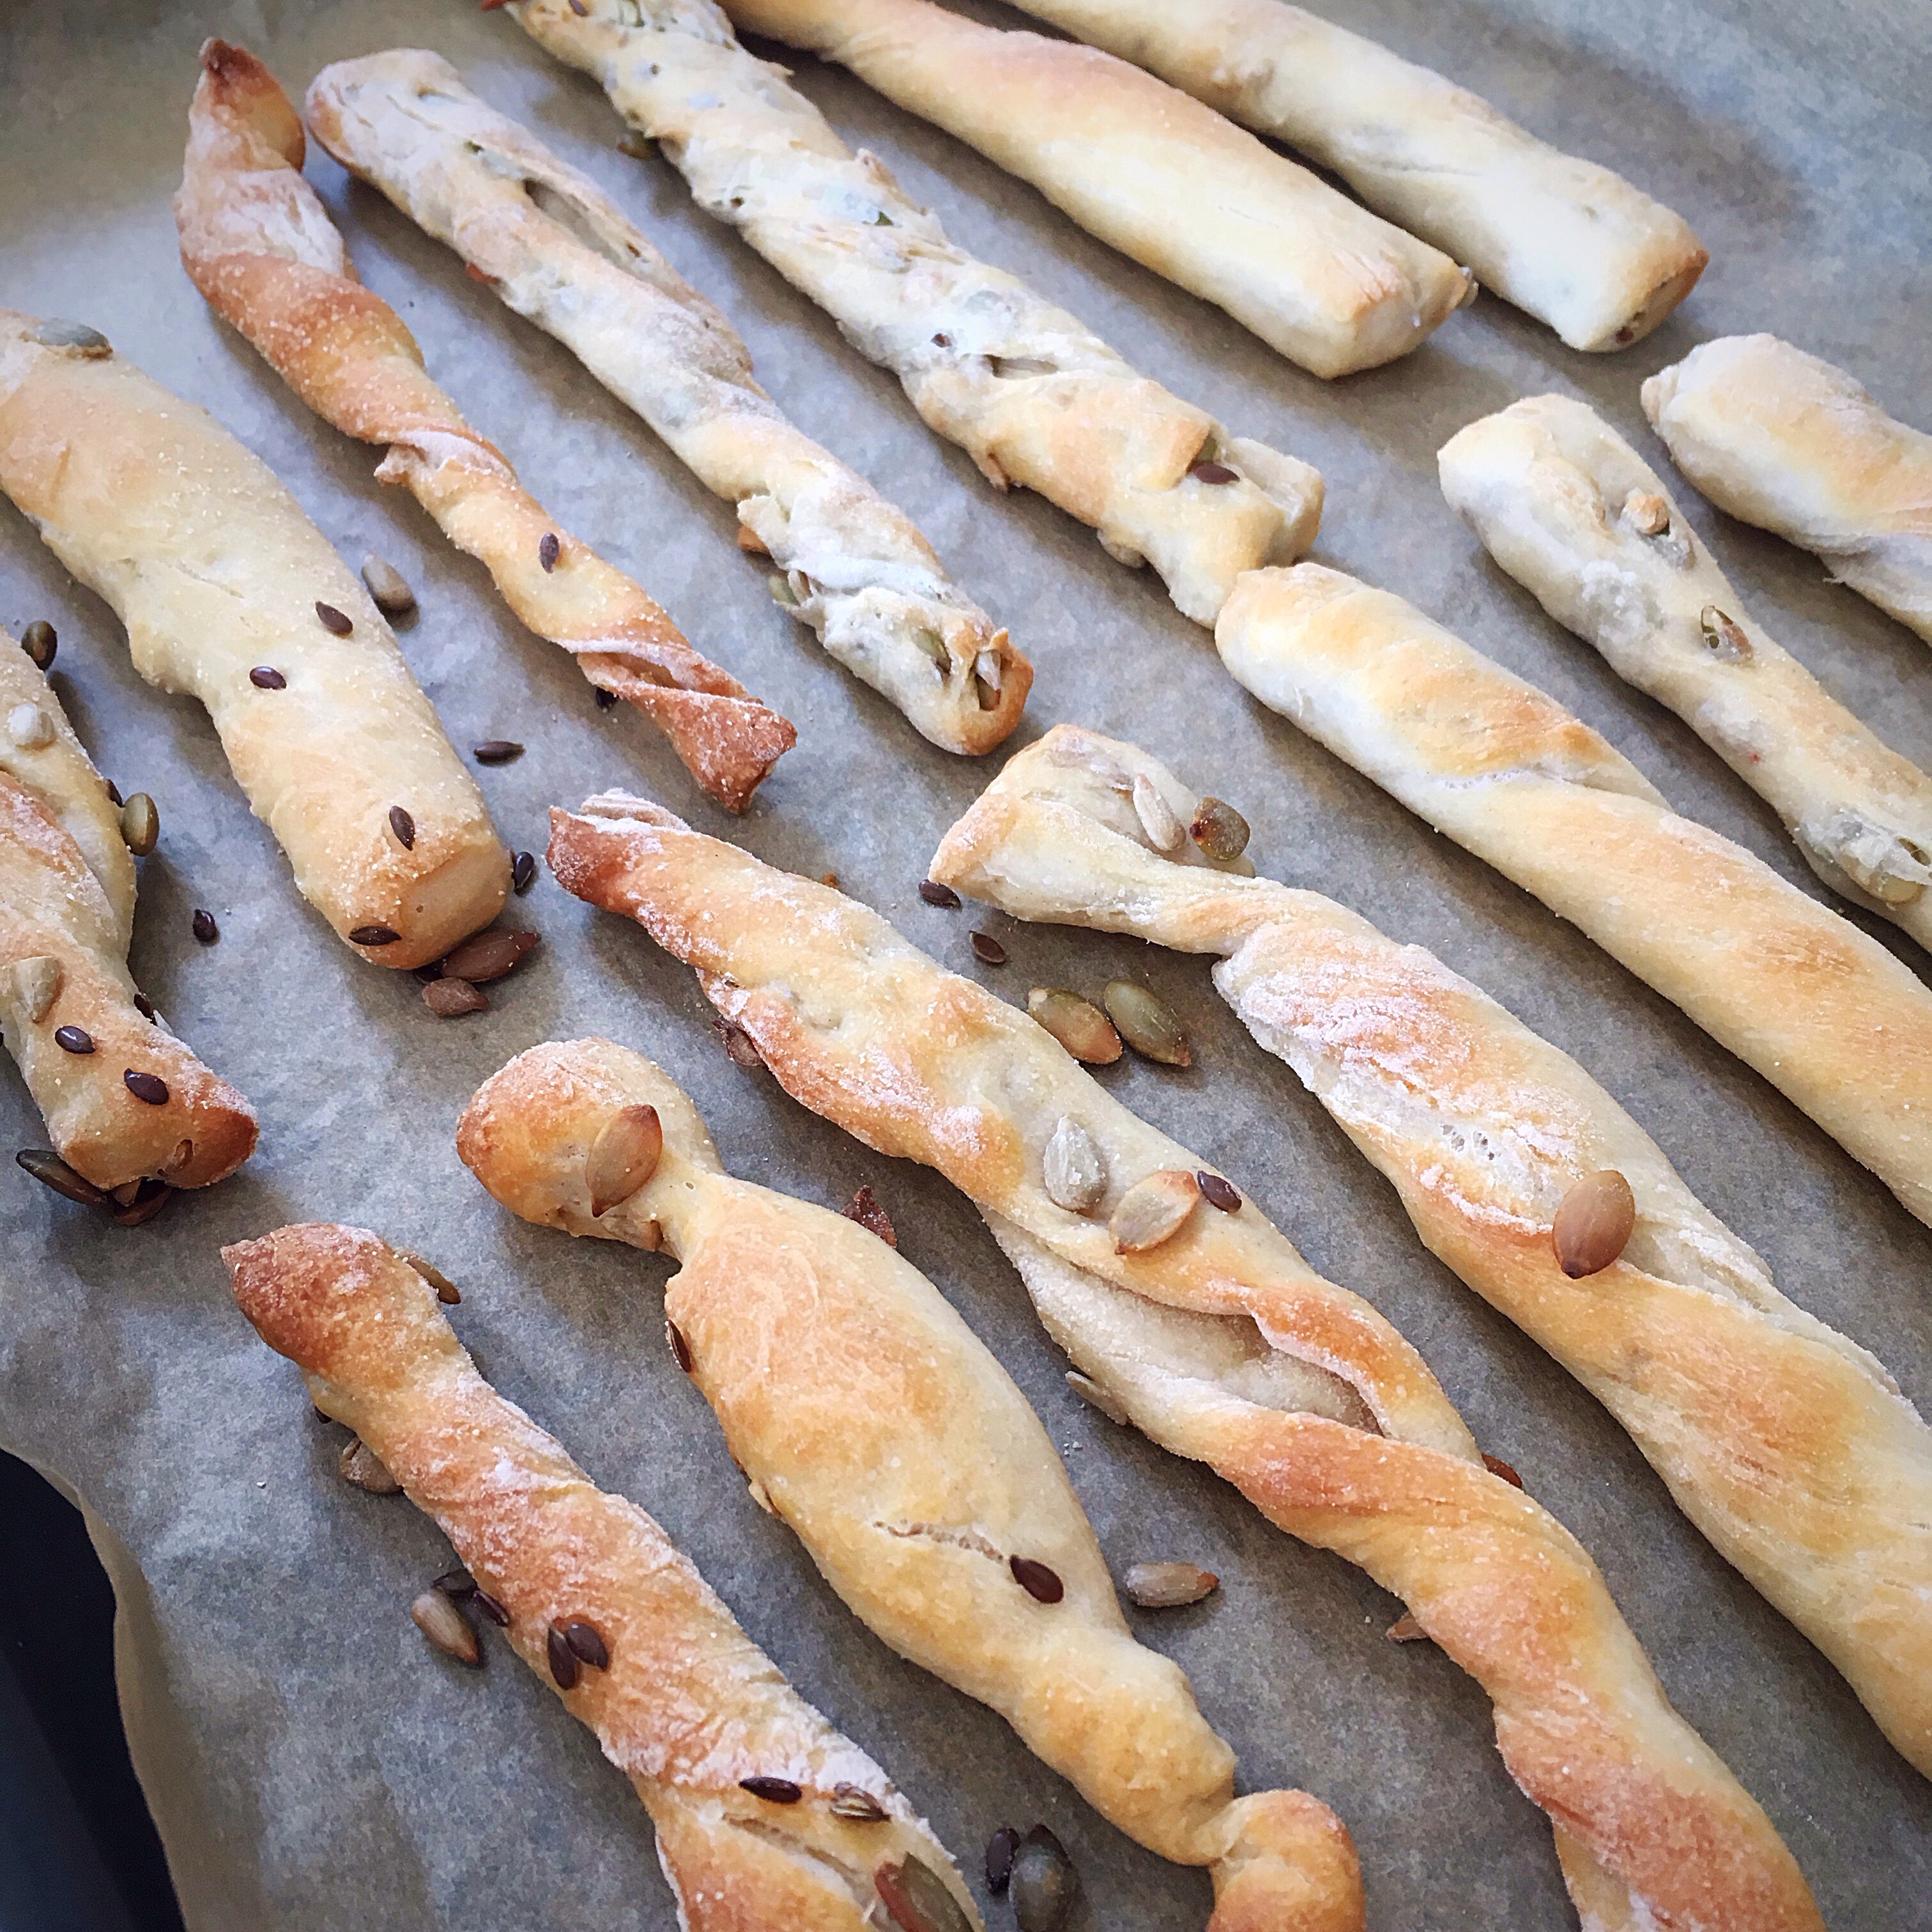 A bunch of bread sticks are on the pan